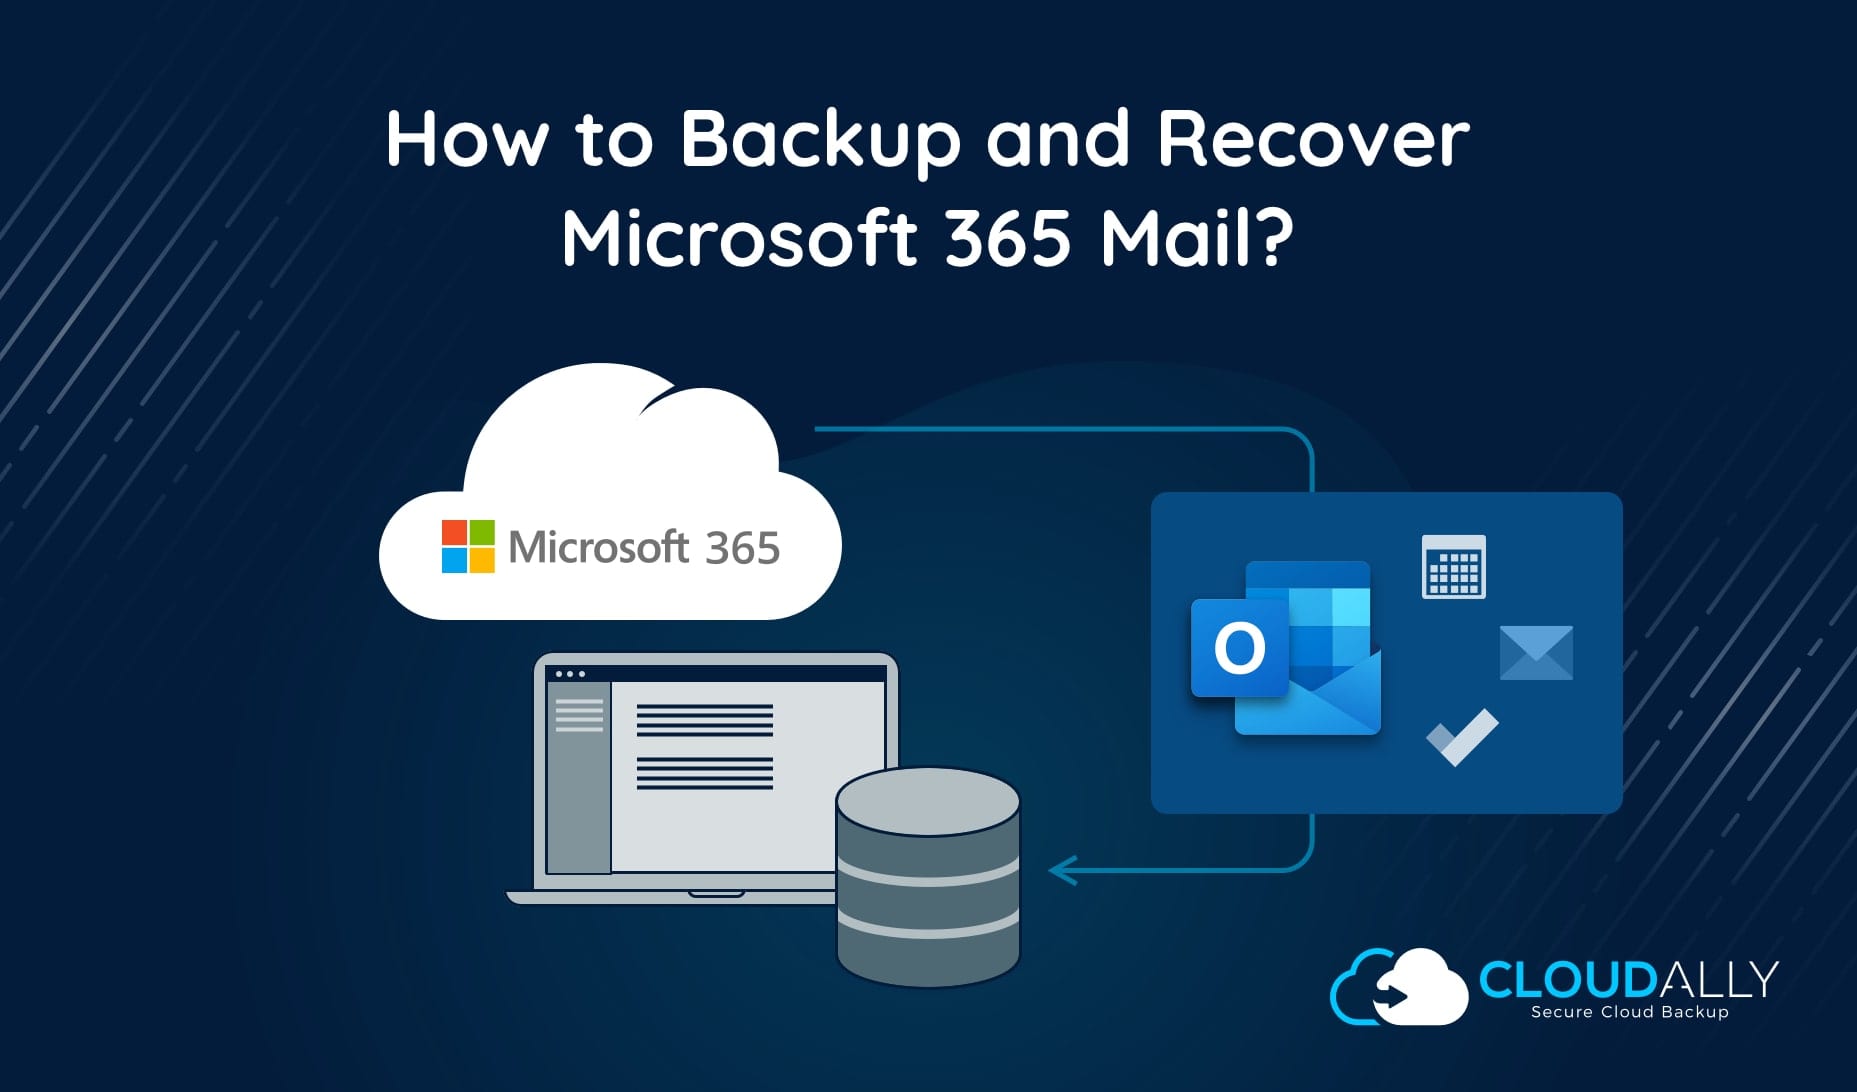 How to Backup and Recover Microsoft Office 365 Mail?